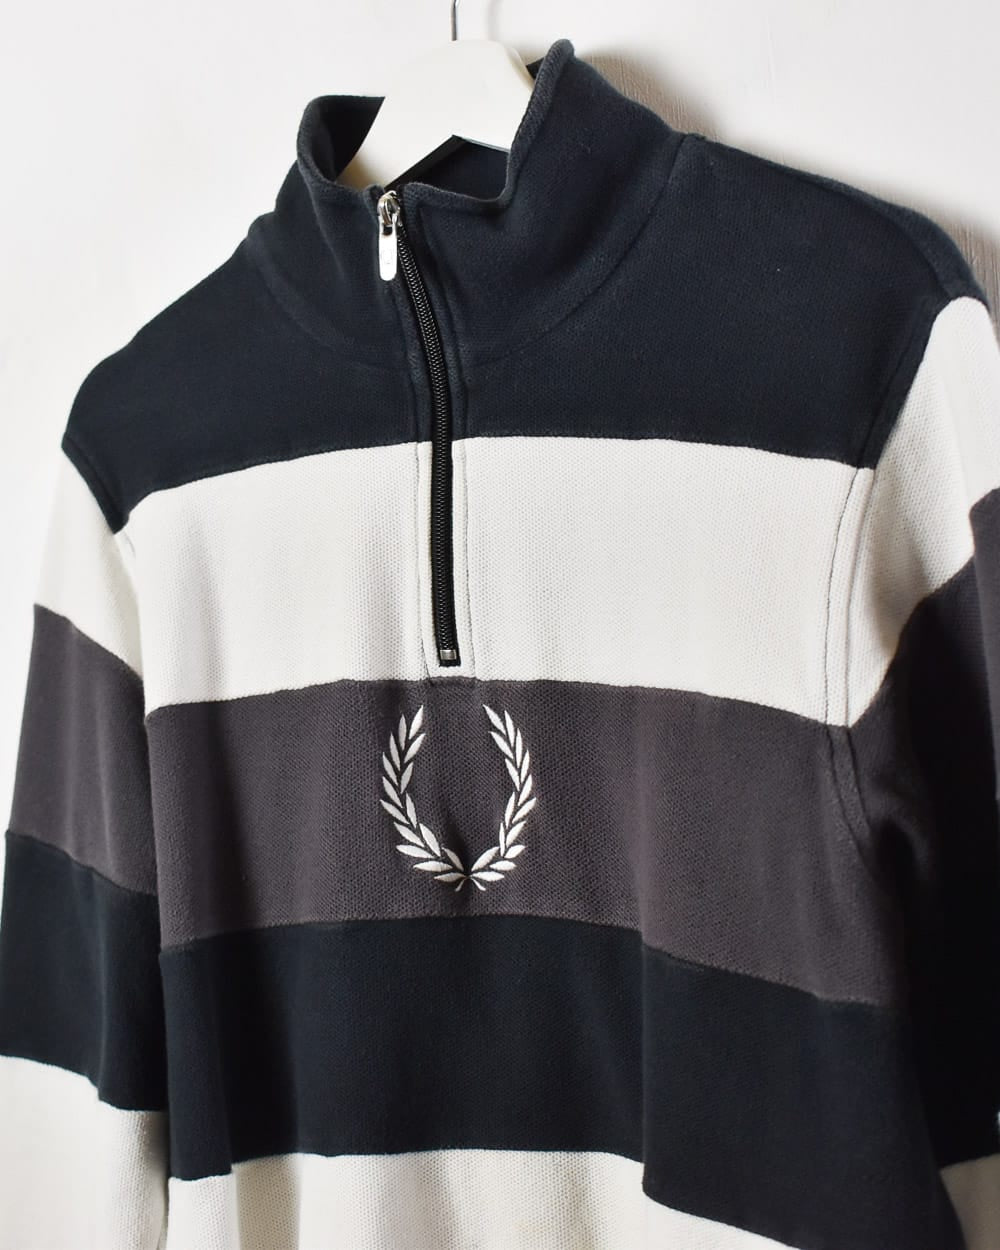 Black Fred Perry Striped 1/4 Zip Sweatshirt - Small